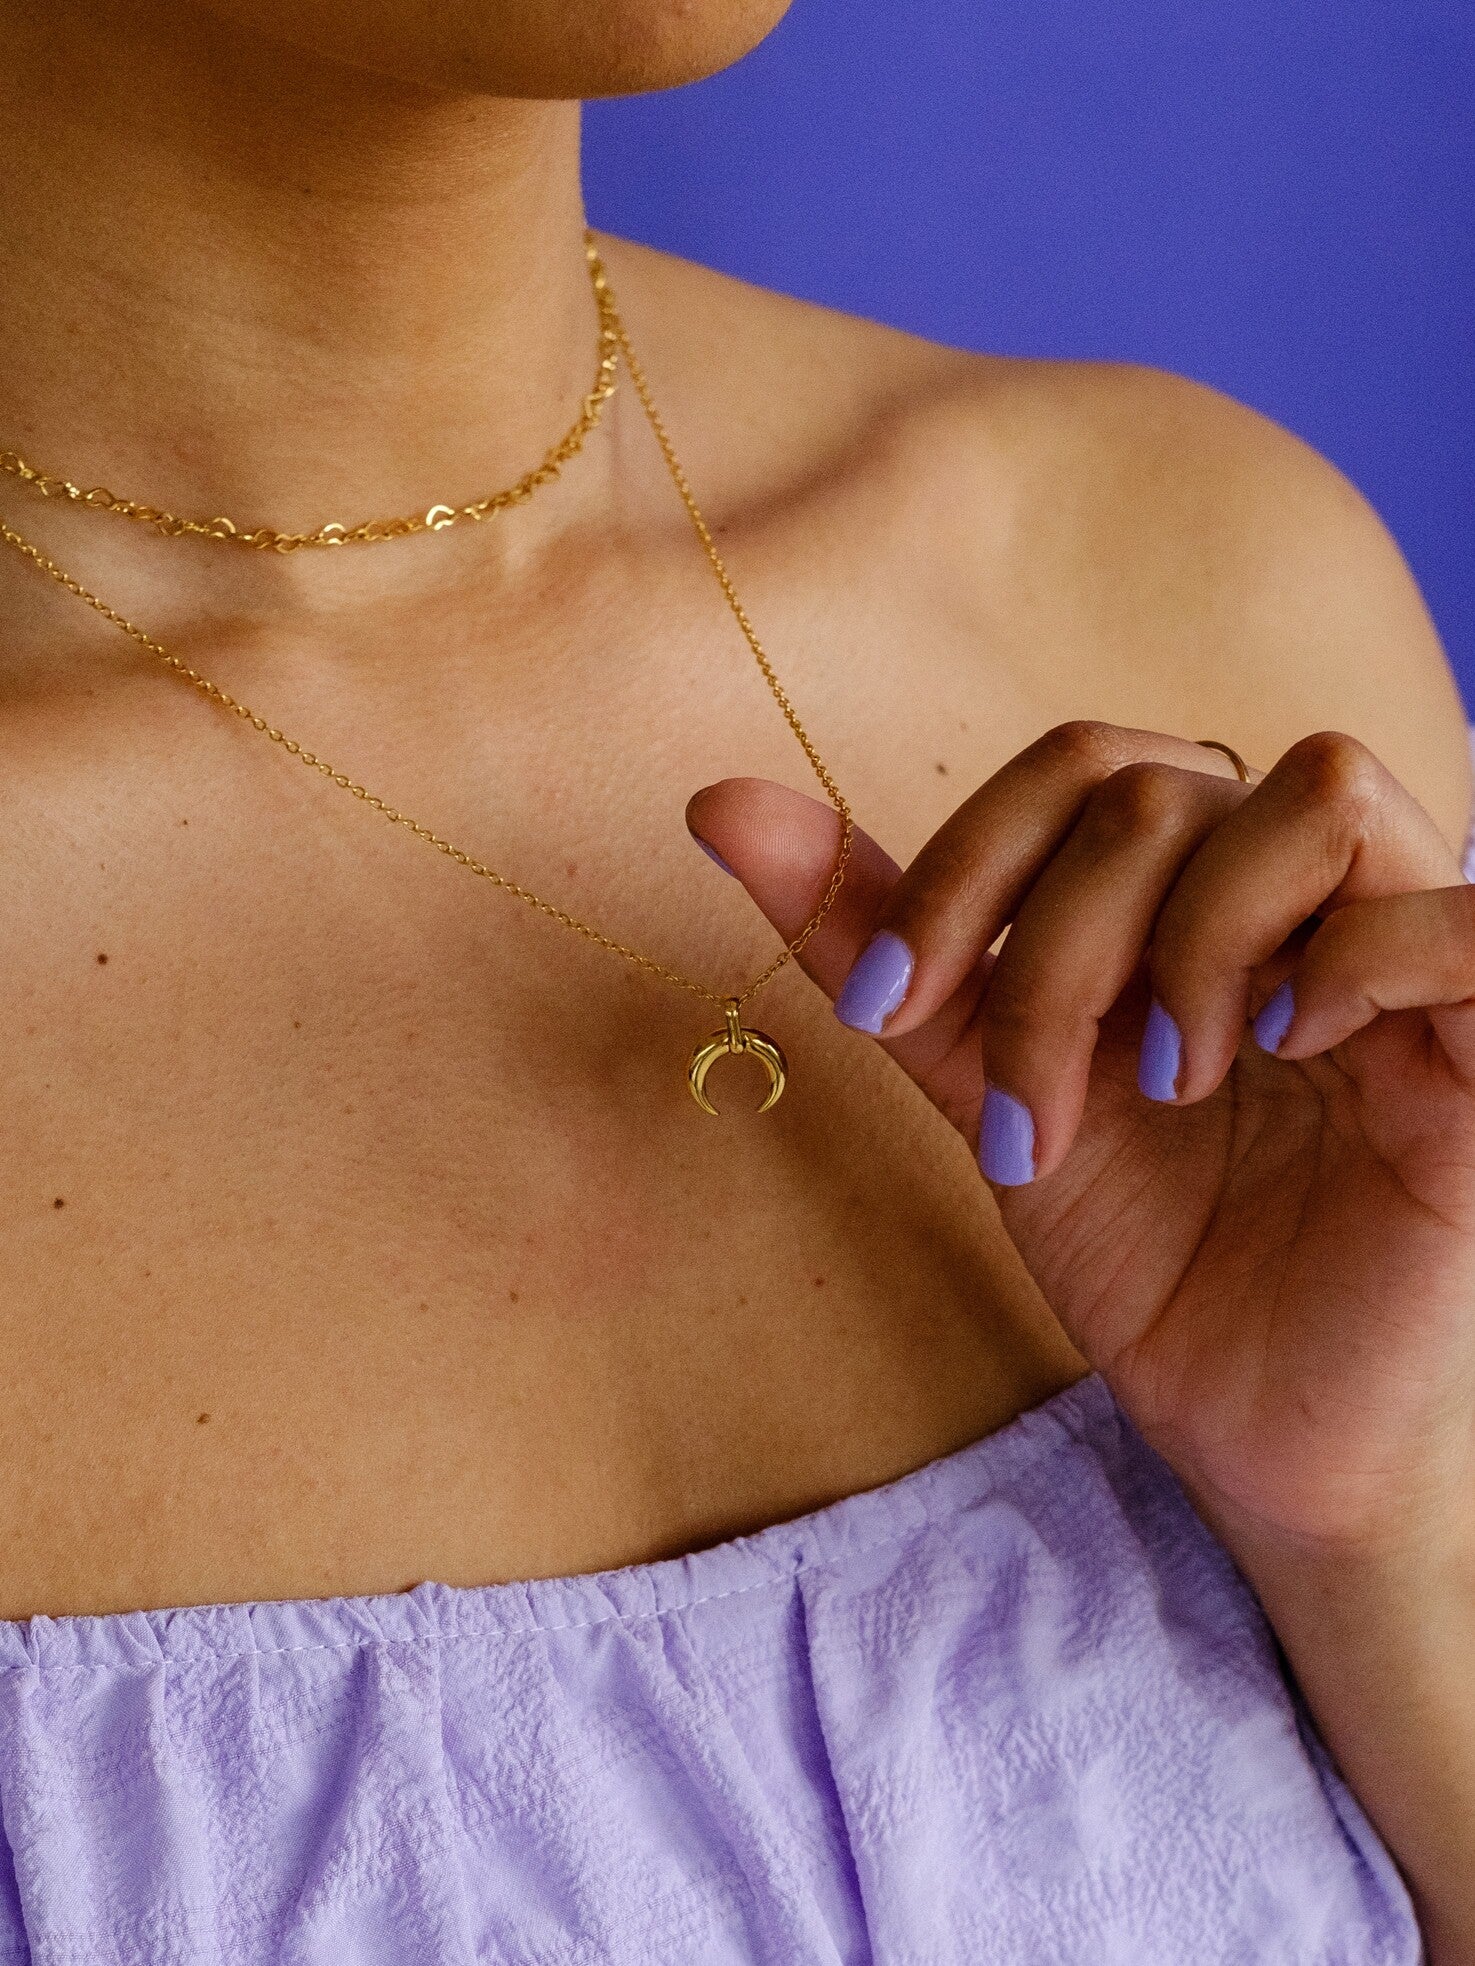 A woman wears two gold necklaces. One necklace is a choker made up of heart shaped chain links. She hold the other necklace which has a crescent moon pendant